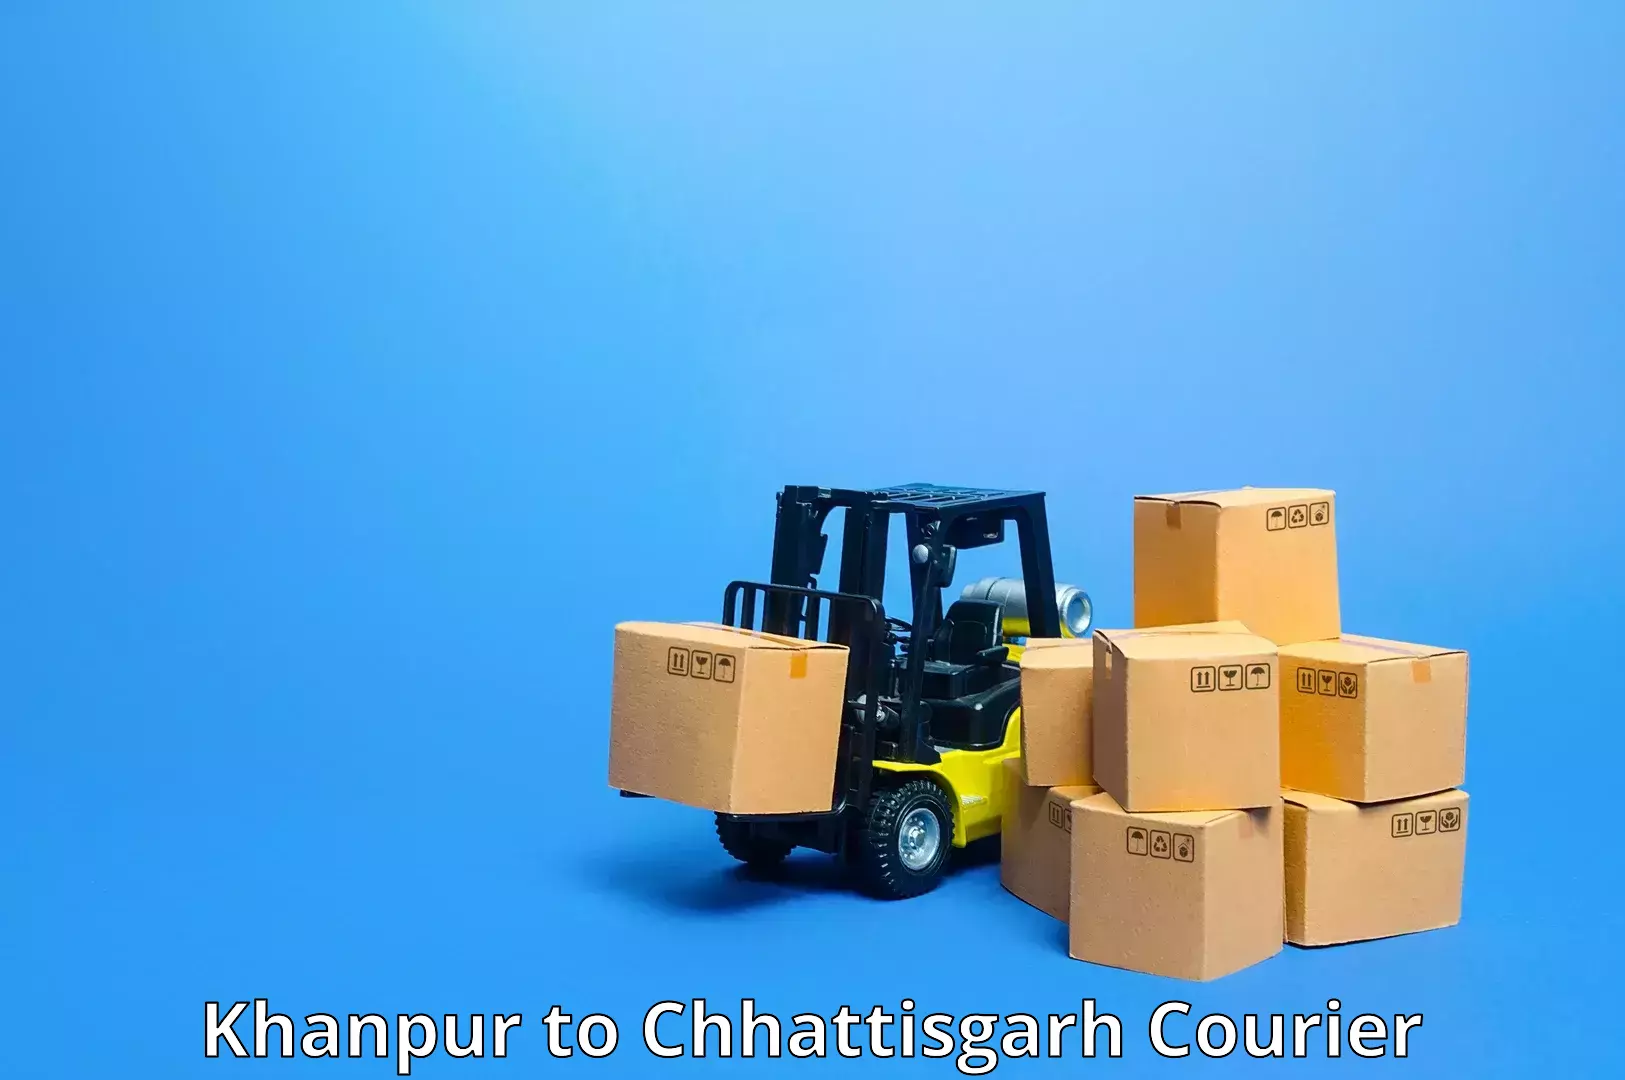 Professional parcel services in Khanpur to Bhatapara